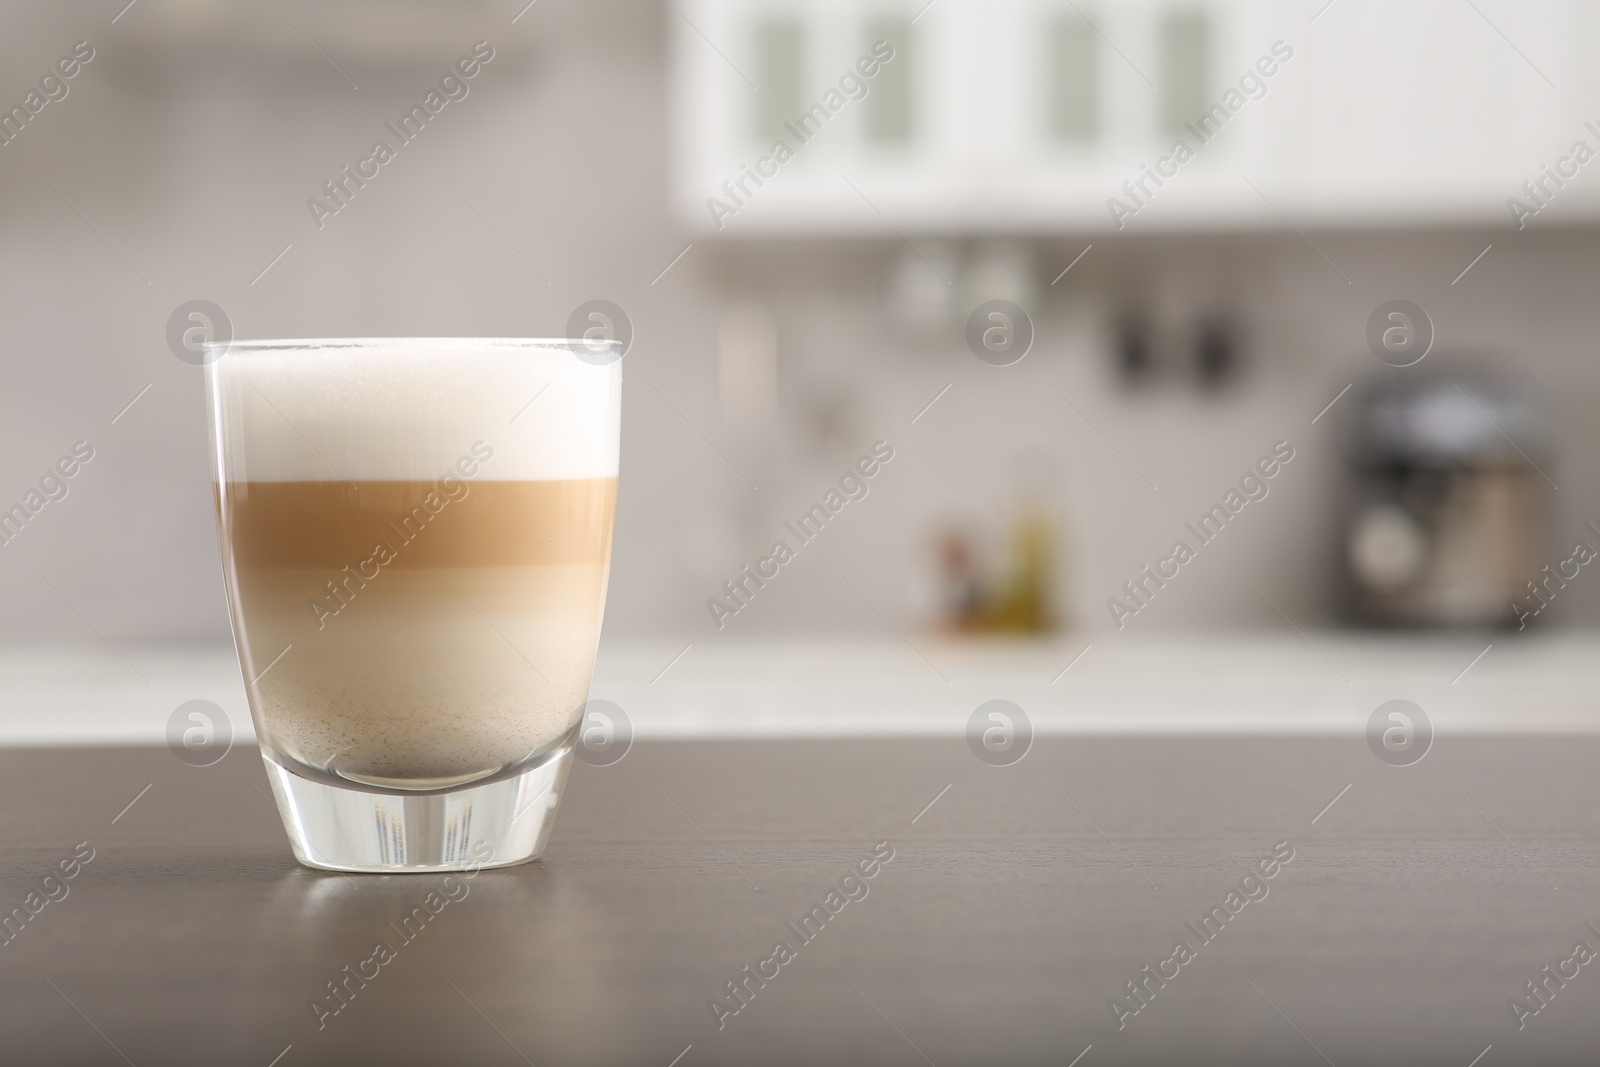 Photo of Glass of aromatic coffee on countertop in kitchen, space for text